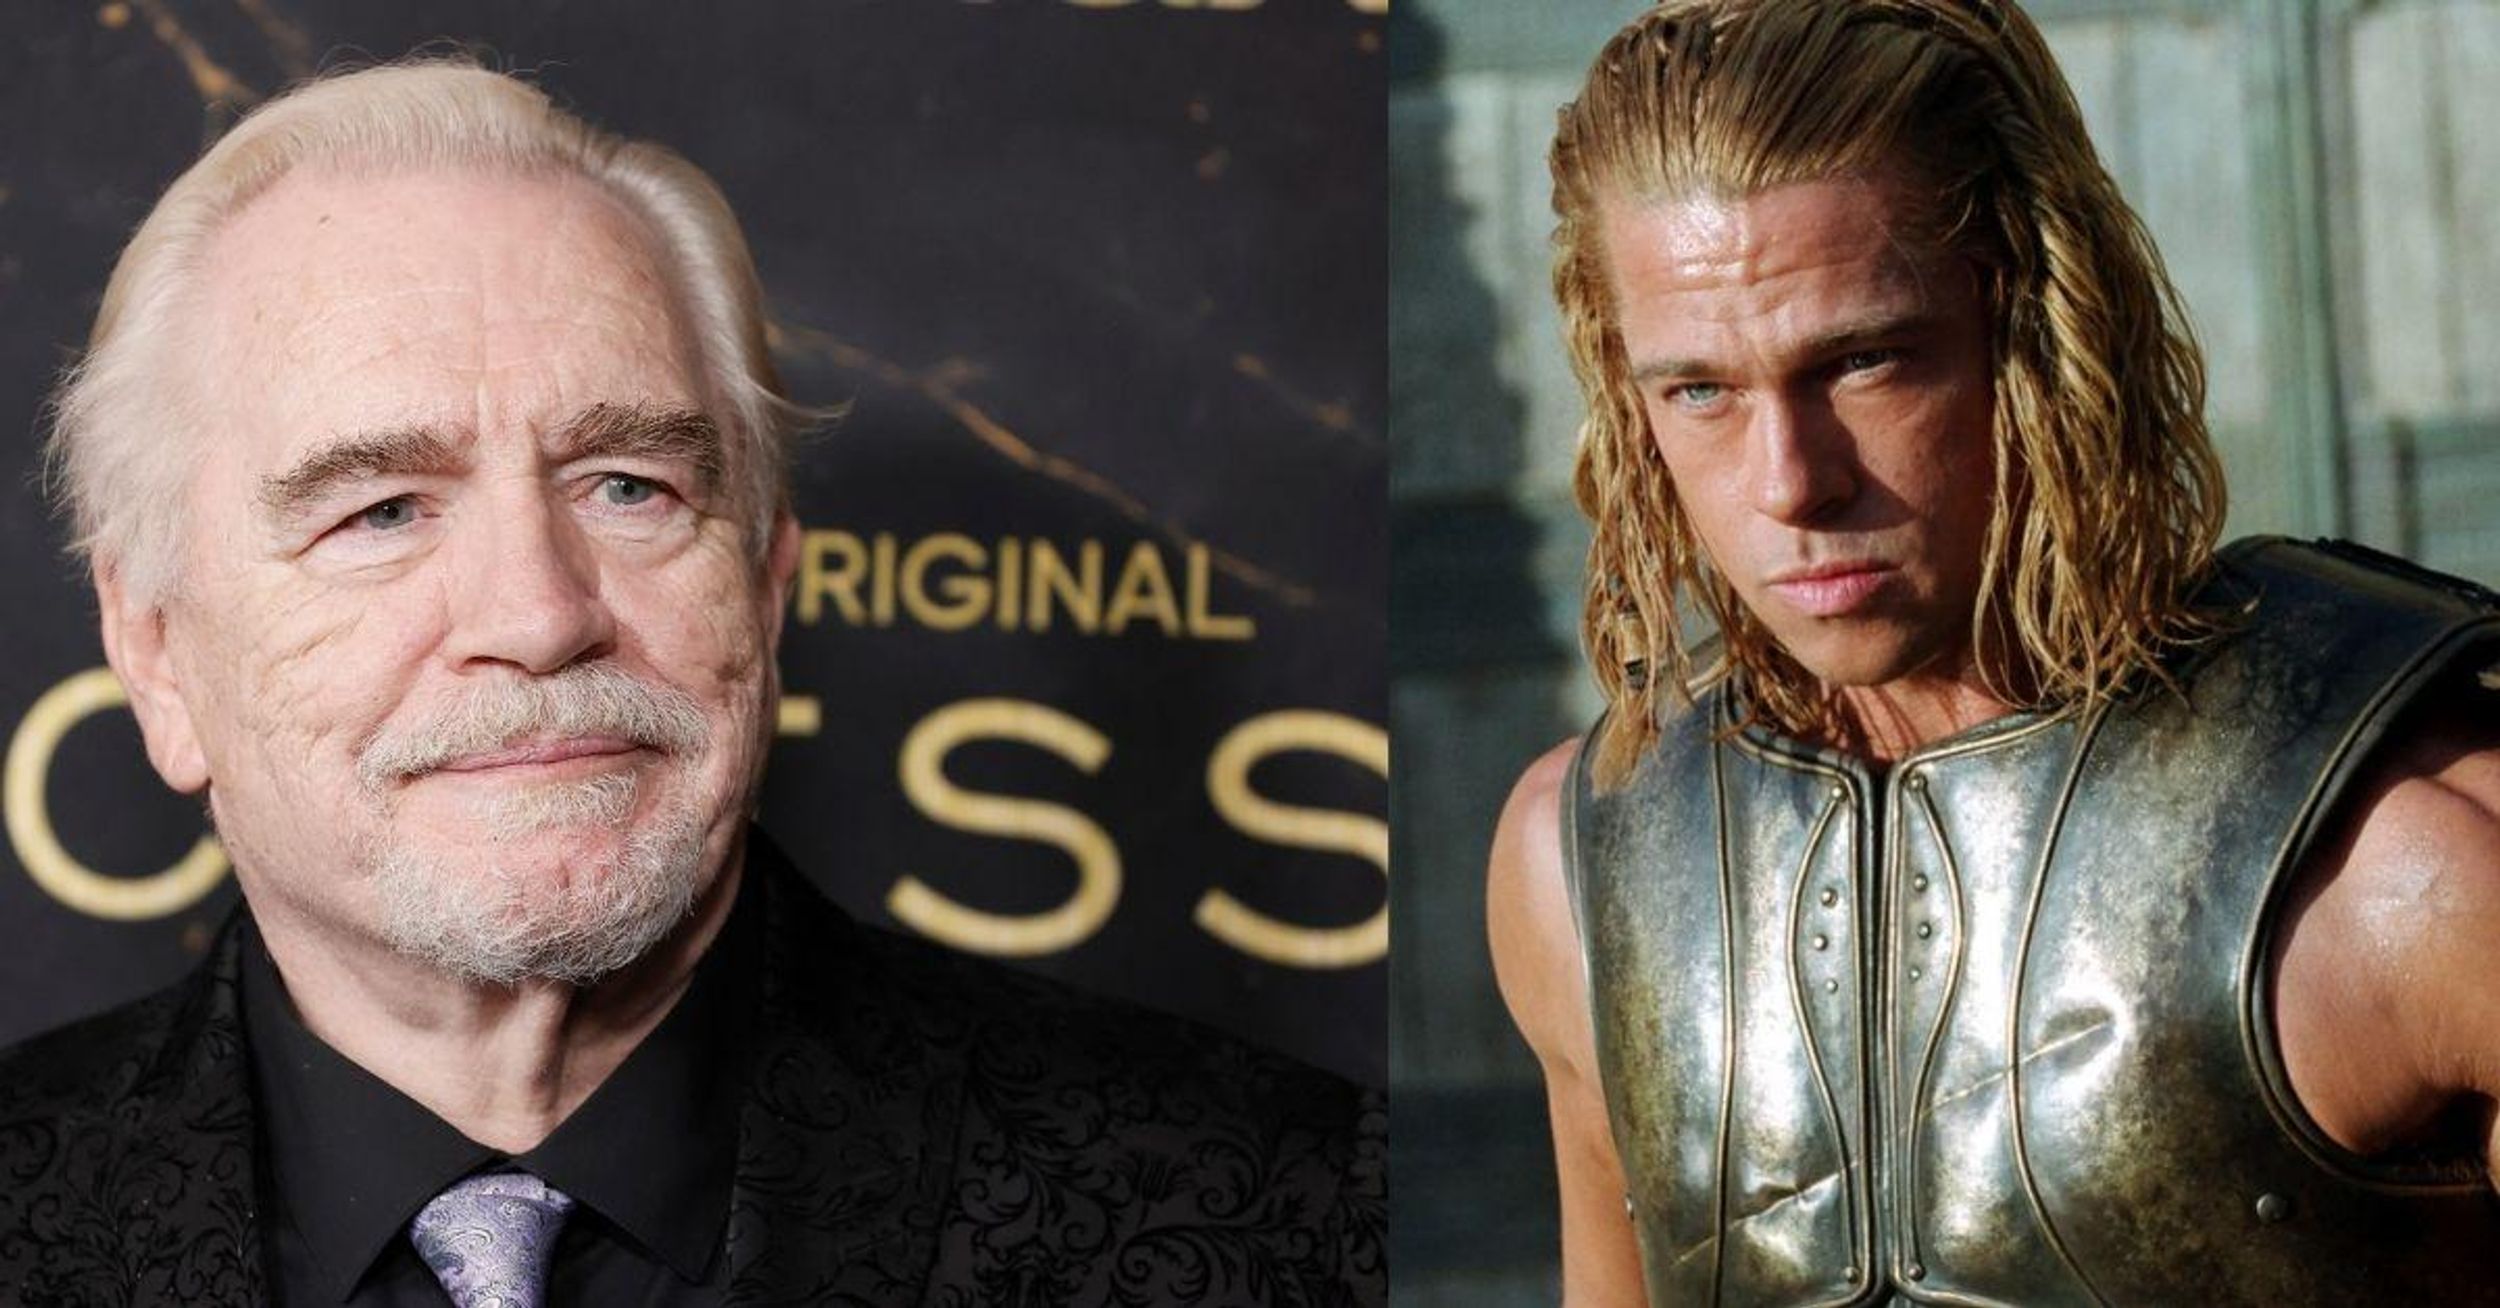 Brian Cox Admits He Was Left 'Agog' By Brad Pitt On Set Of 'Troy': 'I'm Straight But I Thought Wow, My God!'